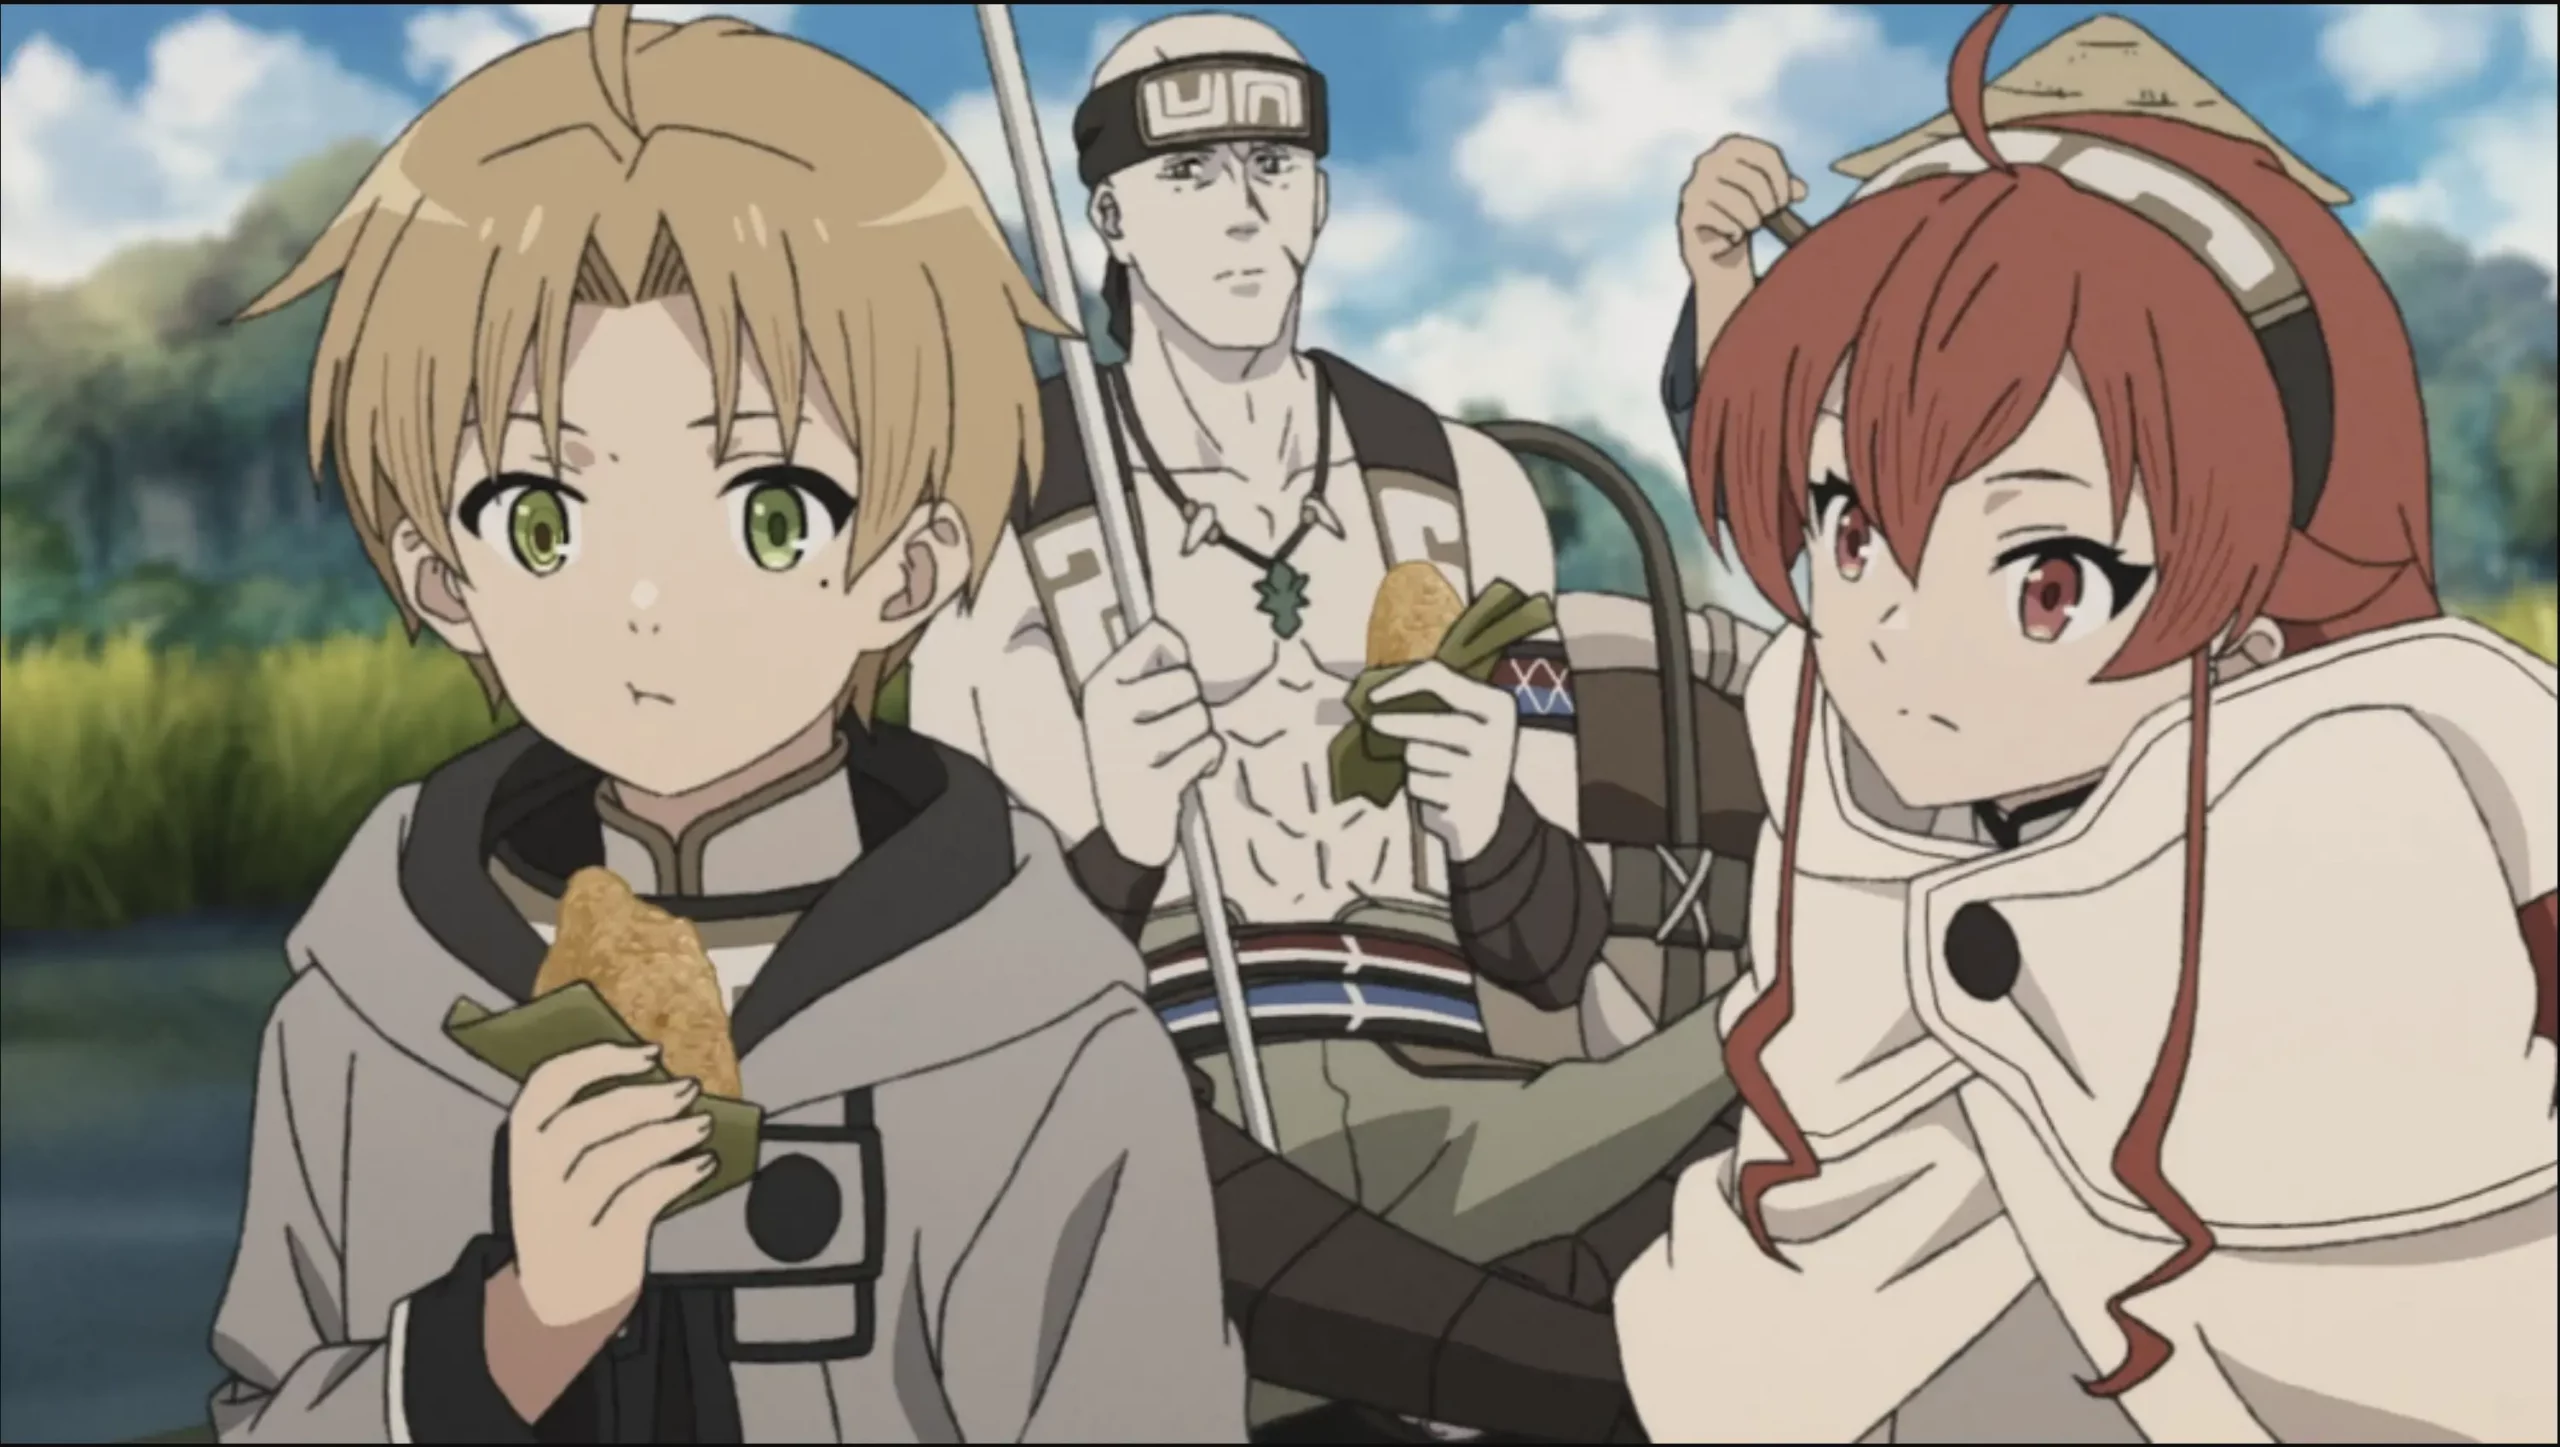 Mushoku Tensei Anime's Return Delayed from July to October